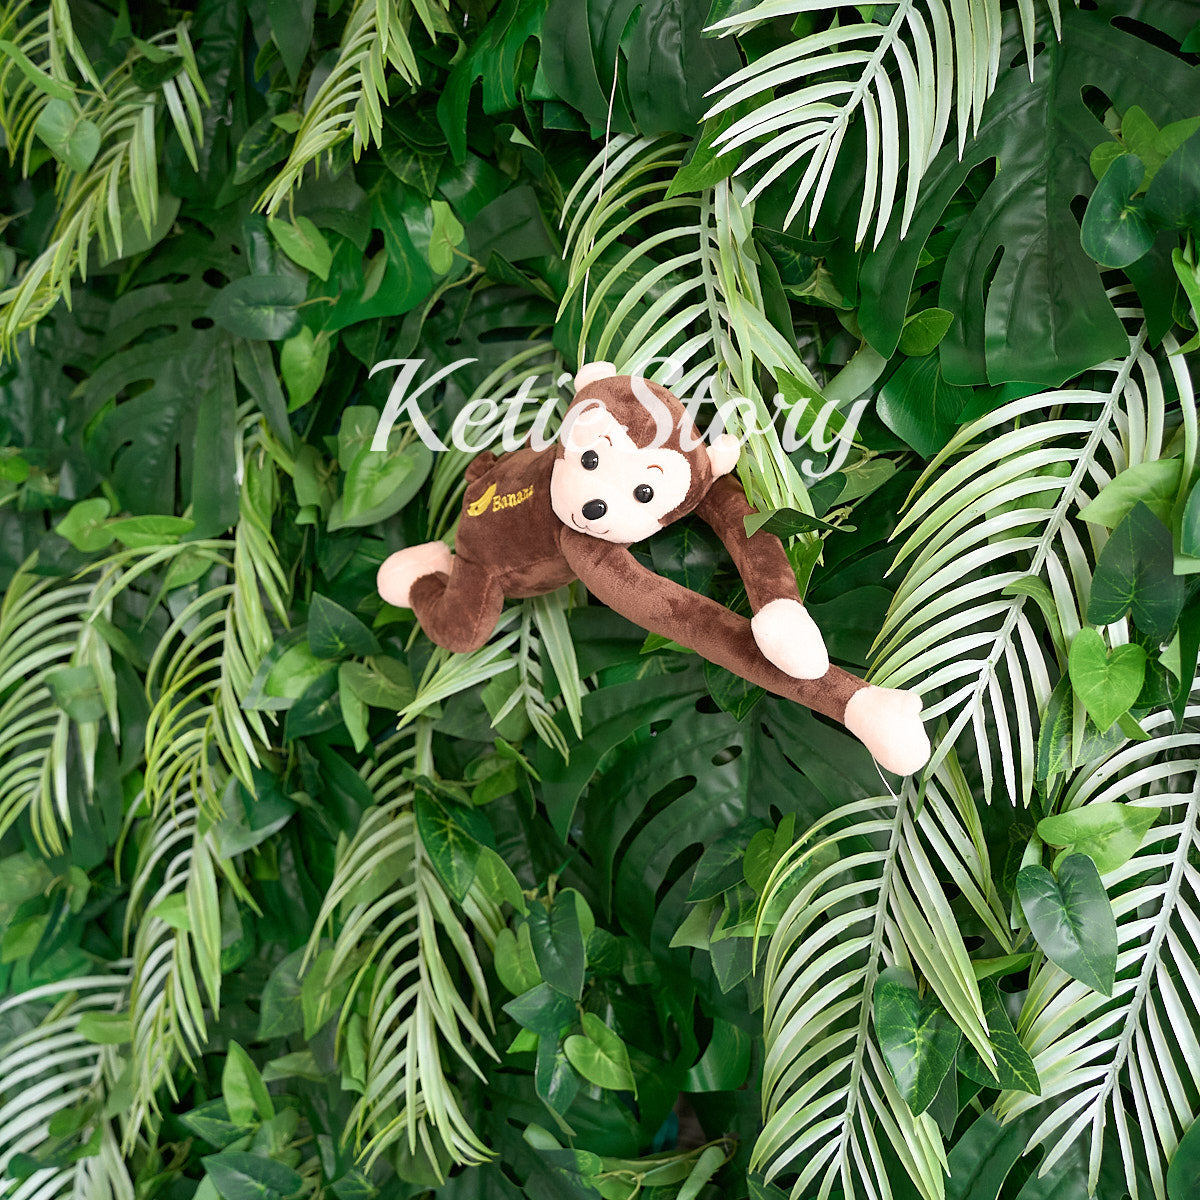 The monkey dolls add a tropical touch to the rainforest fabric flower wall.